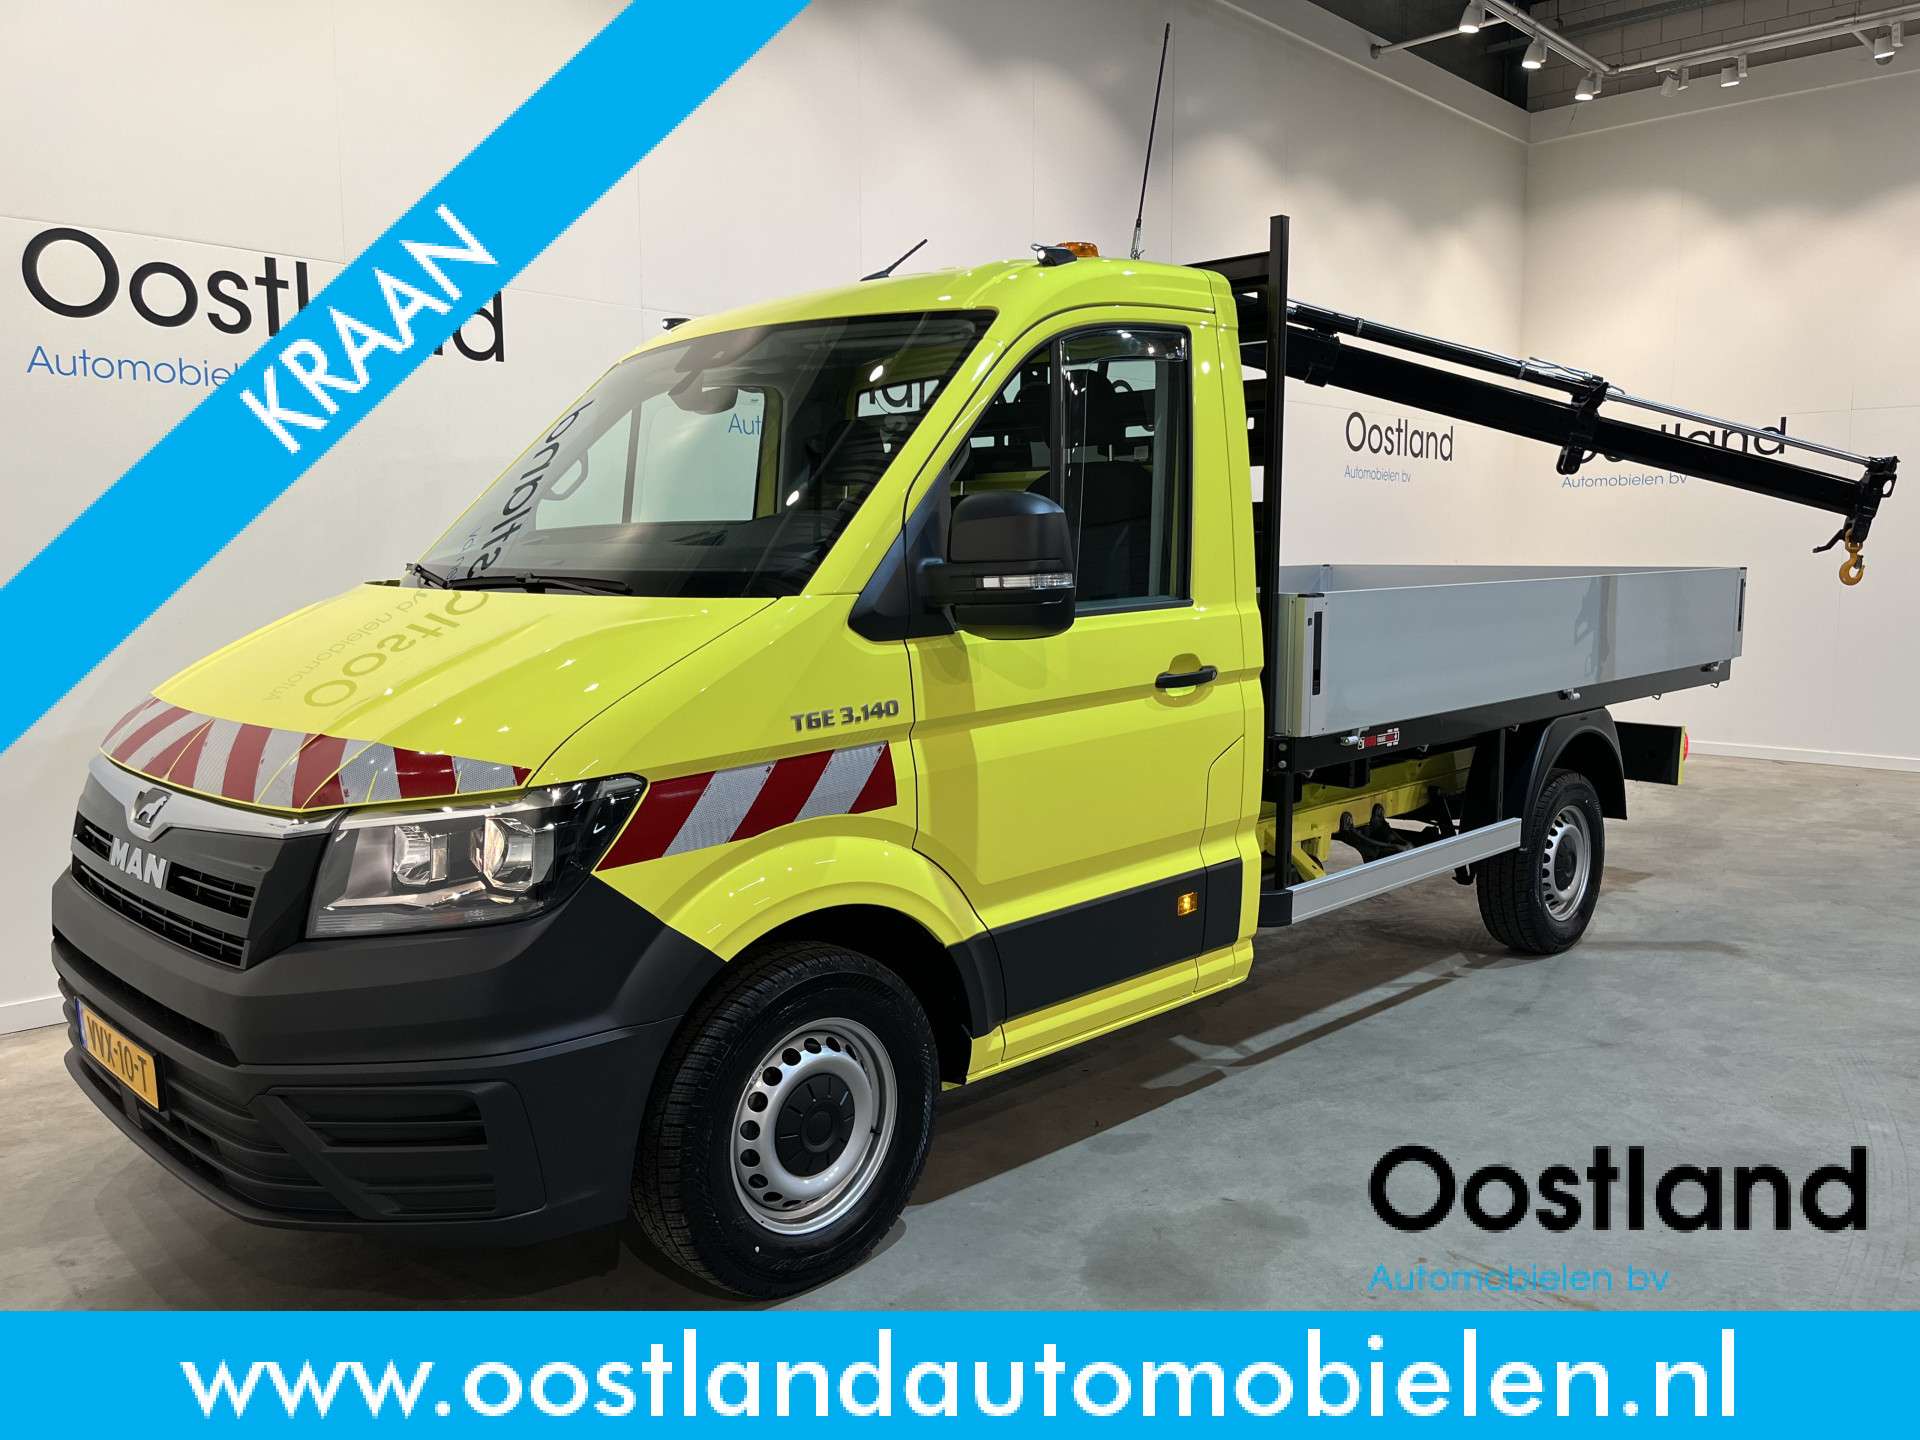 MAN TGE Transporter in Yellow used in GRONINGEN for € 60,440.-